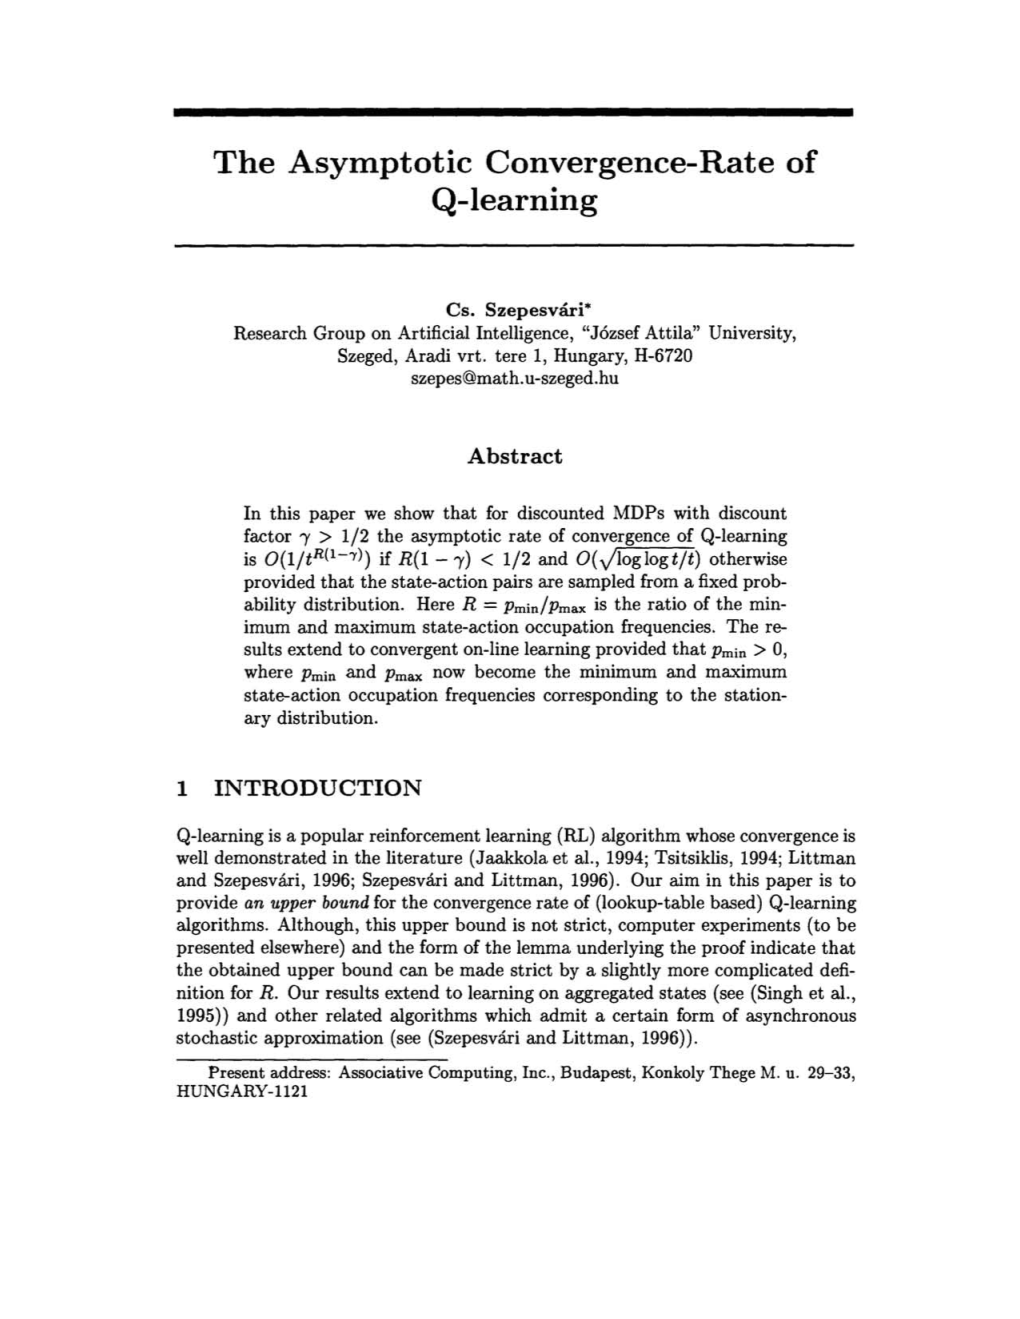 The Asymptotic Convergence-Rate of Q-Learning